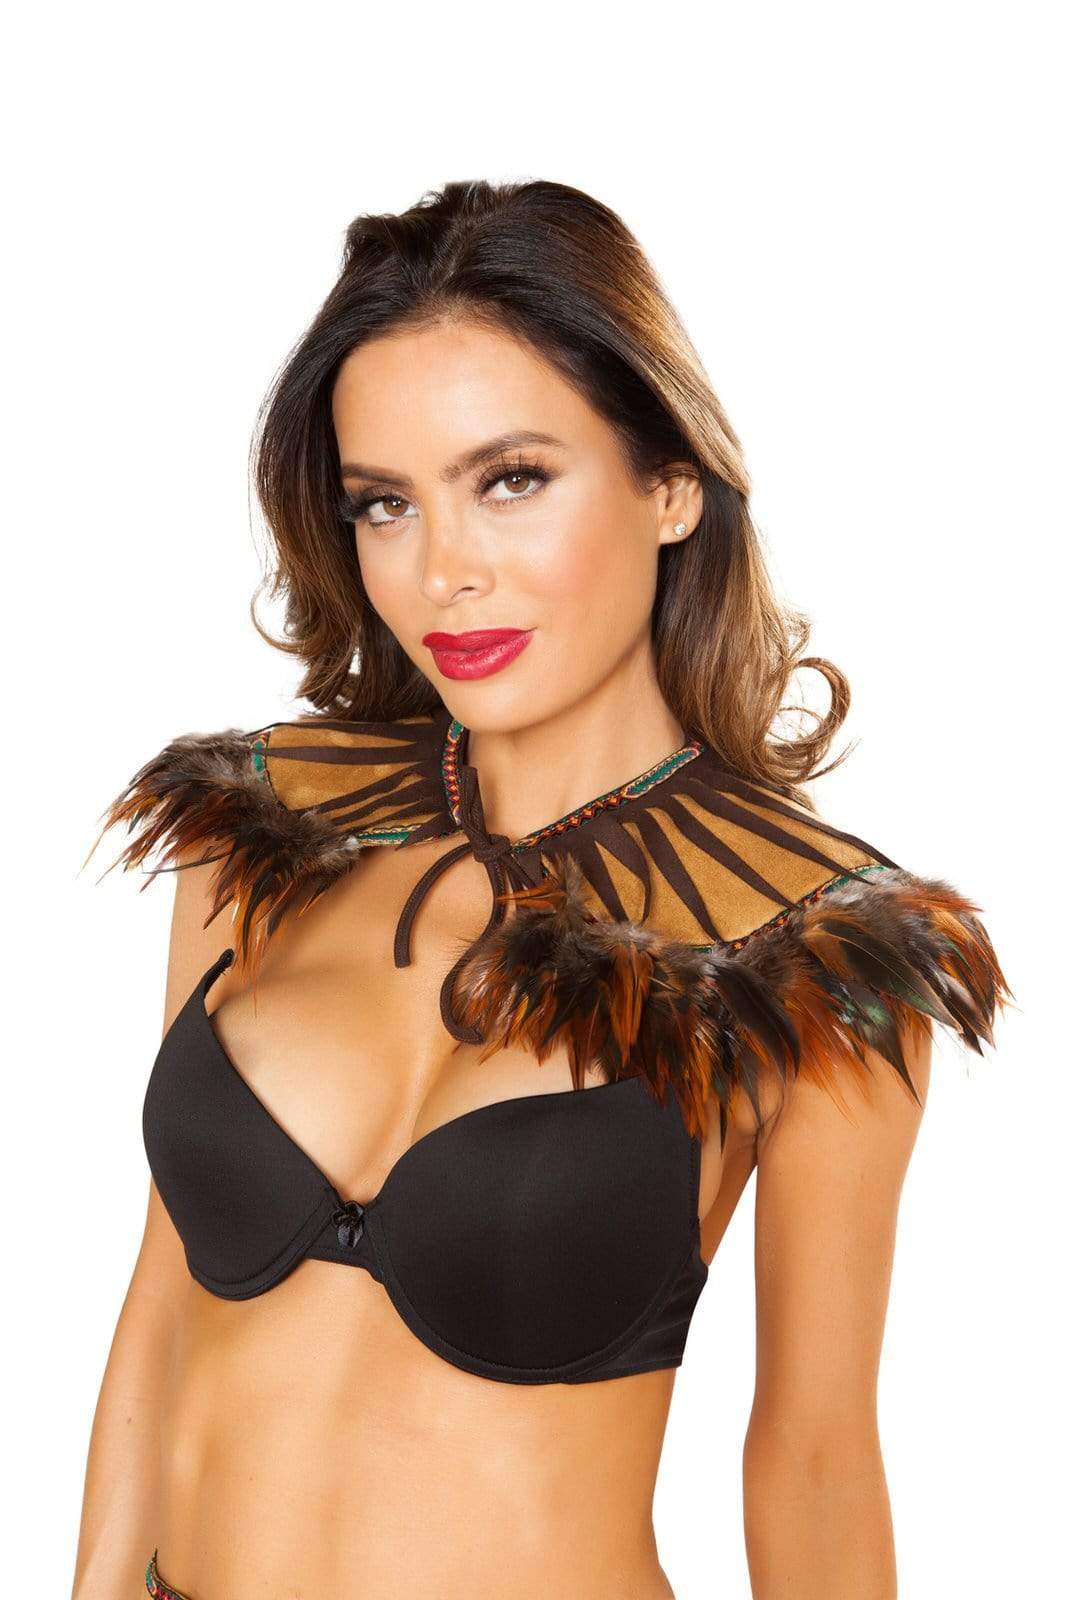 Roma One Size / Brown Native Indian Style Feather Neck Piece Costume Accessory SHC-NEC10118-OS-R Apparel &amp; Accessories &gt; Costumes &amp; Accessories &gt; Costumes